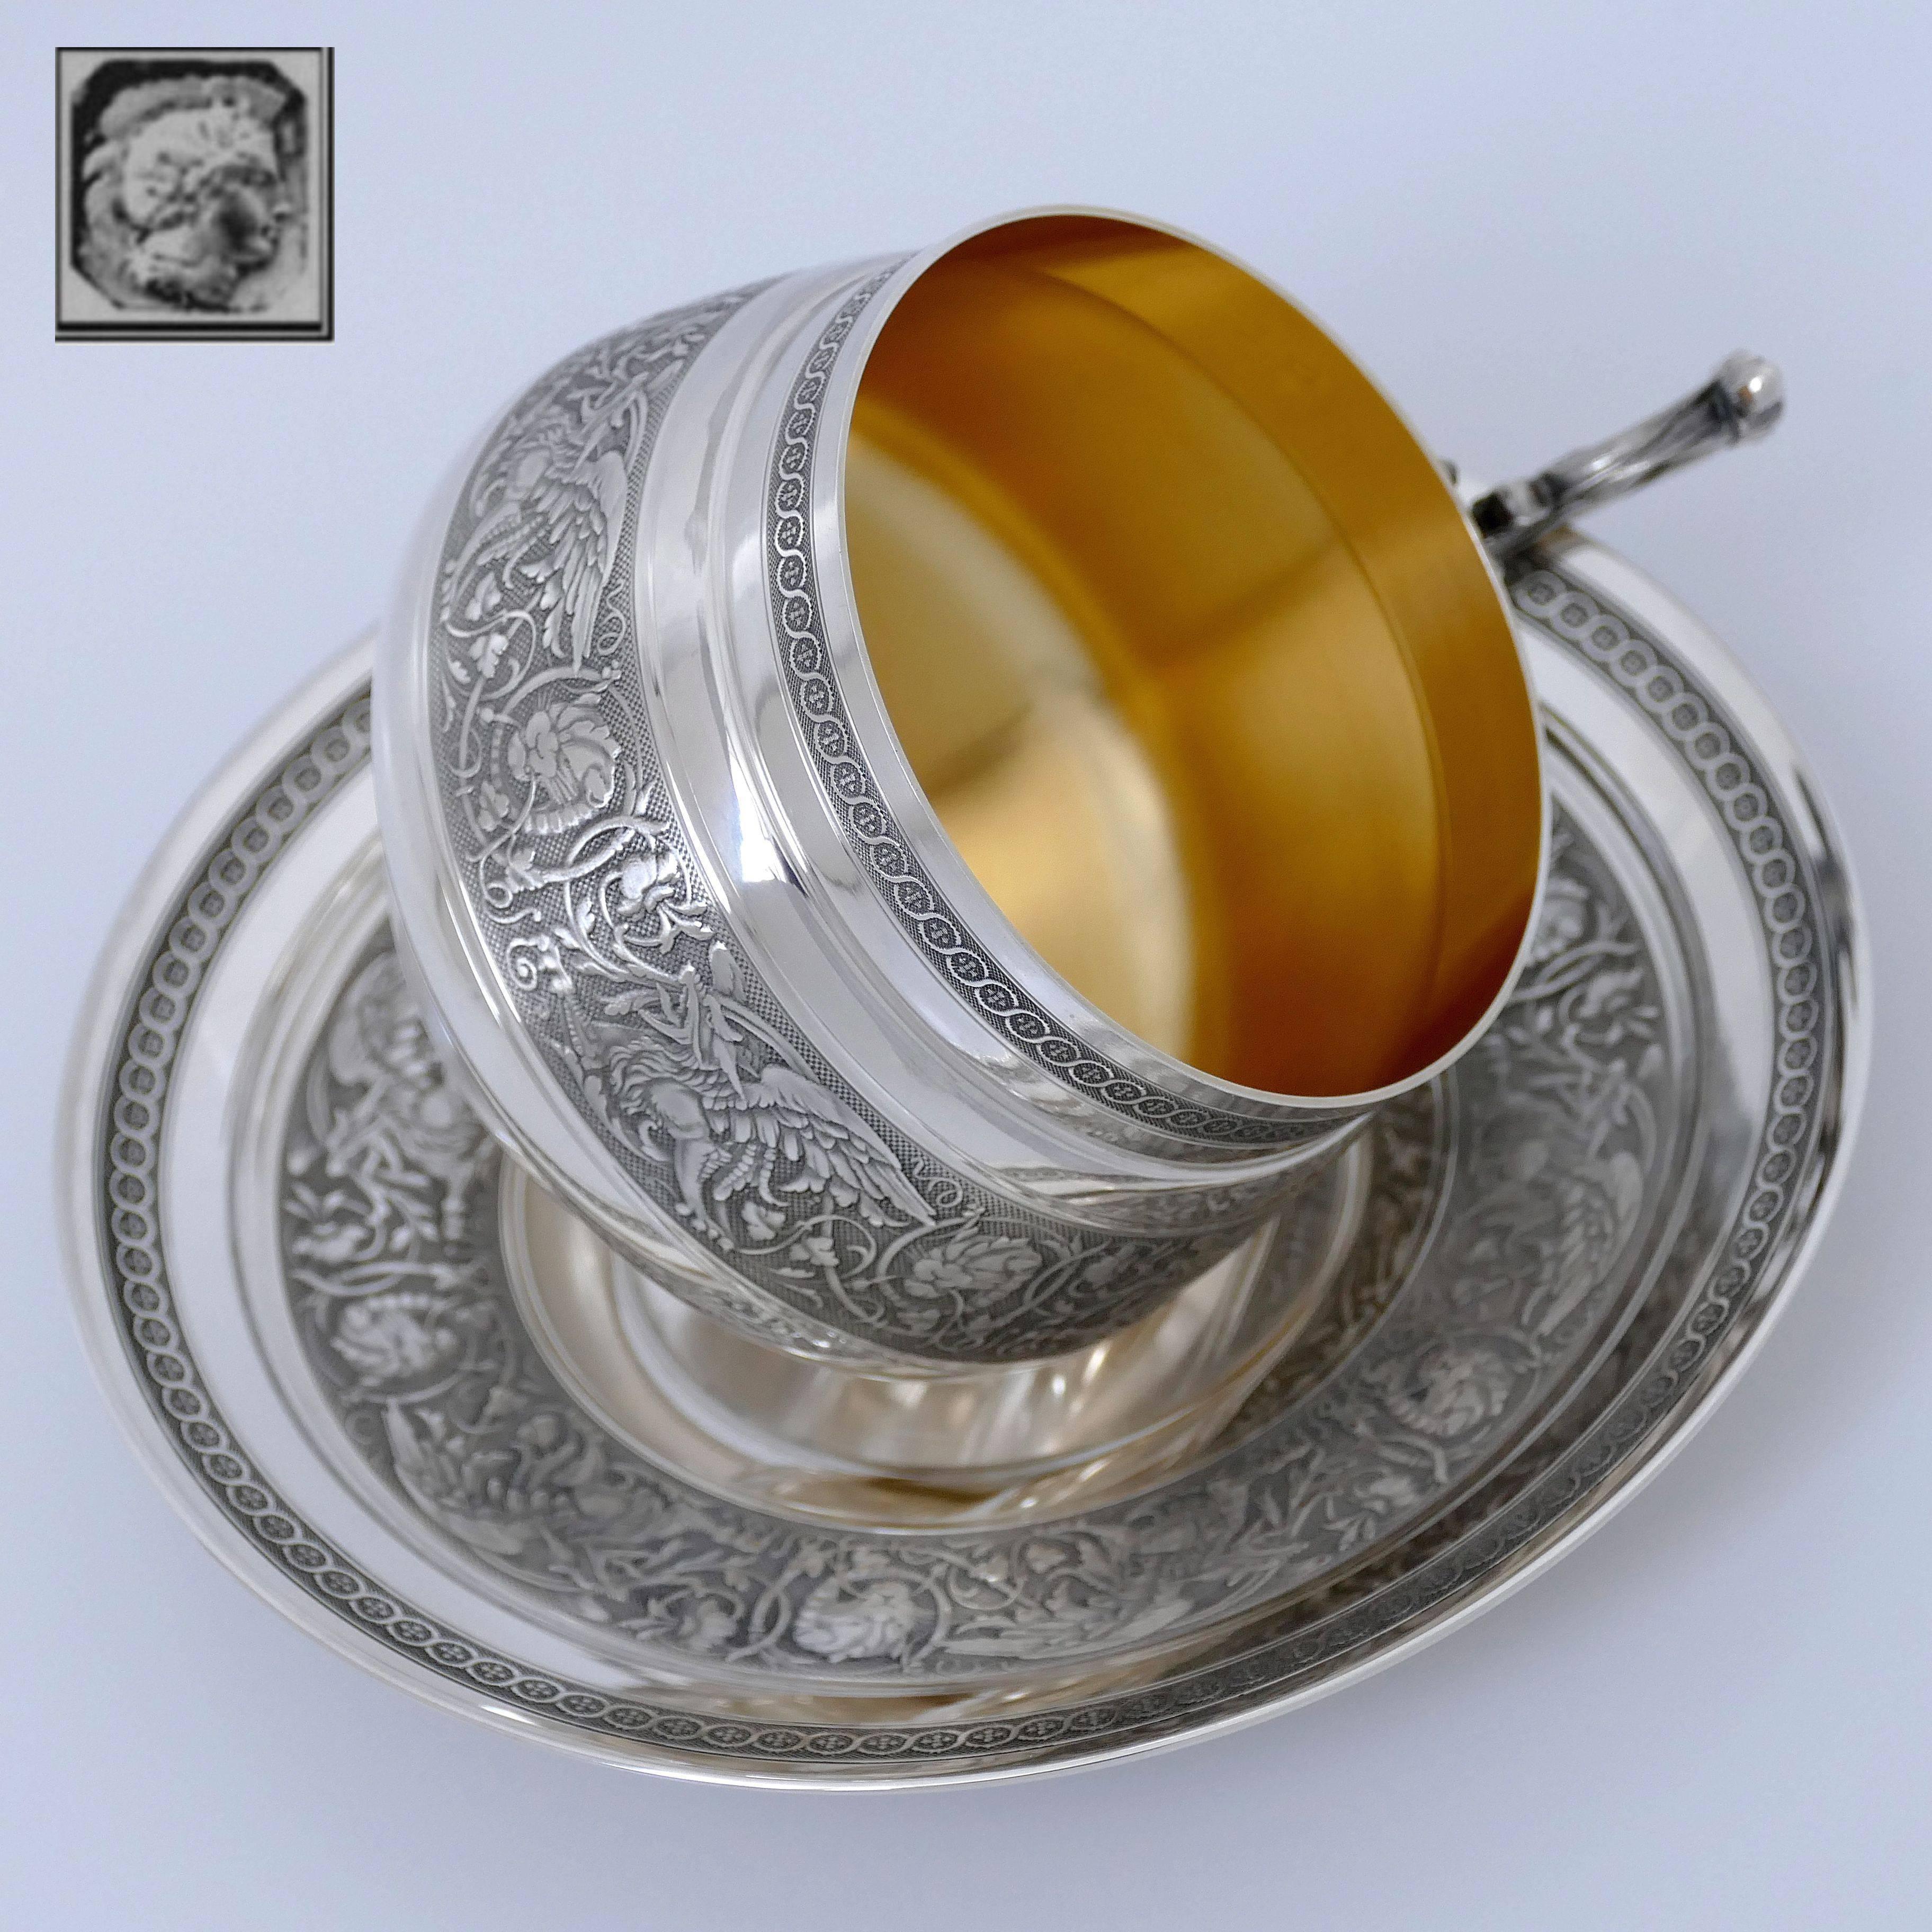 Renaissance Imposing French Sterling Silver 18-Karat Gold Chocolate Tea Cup & Saucer, Dragon